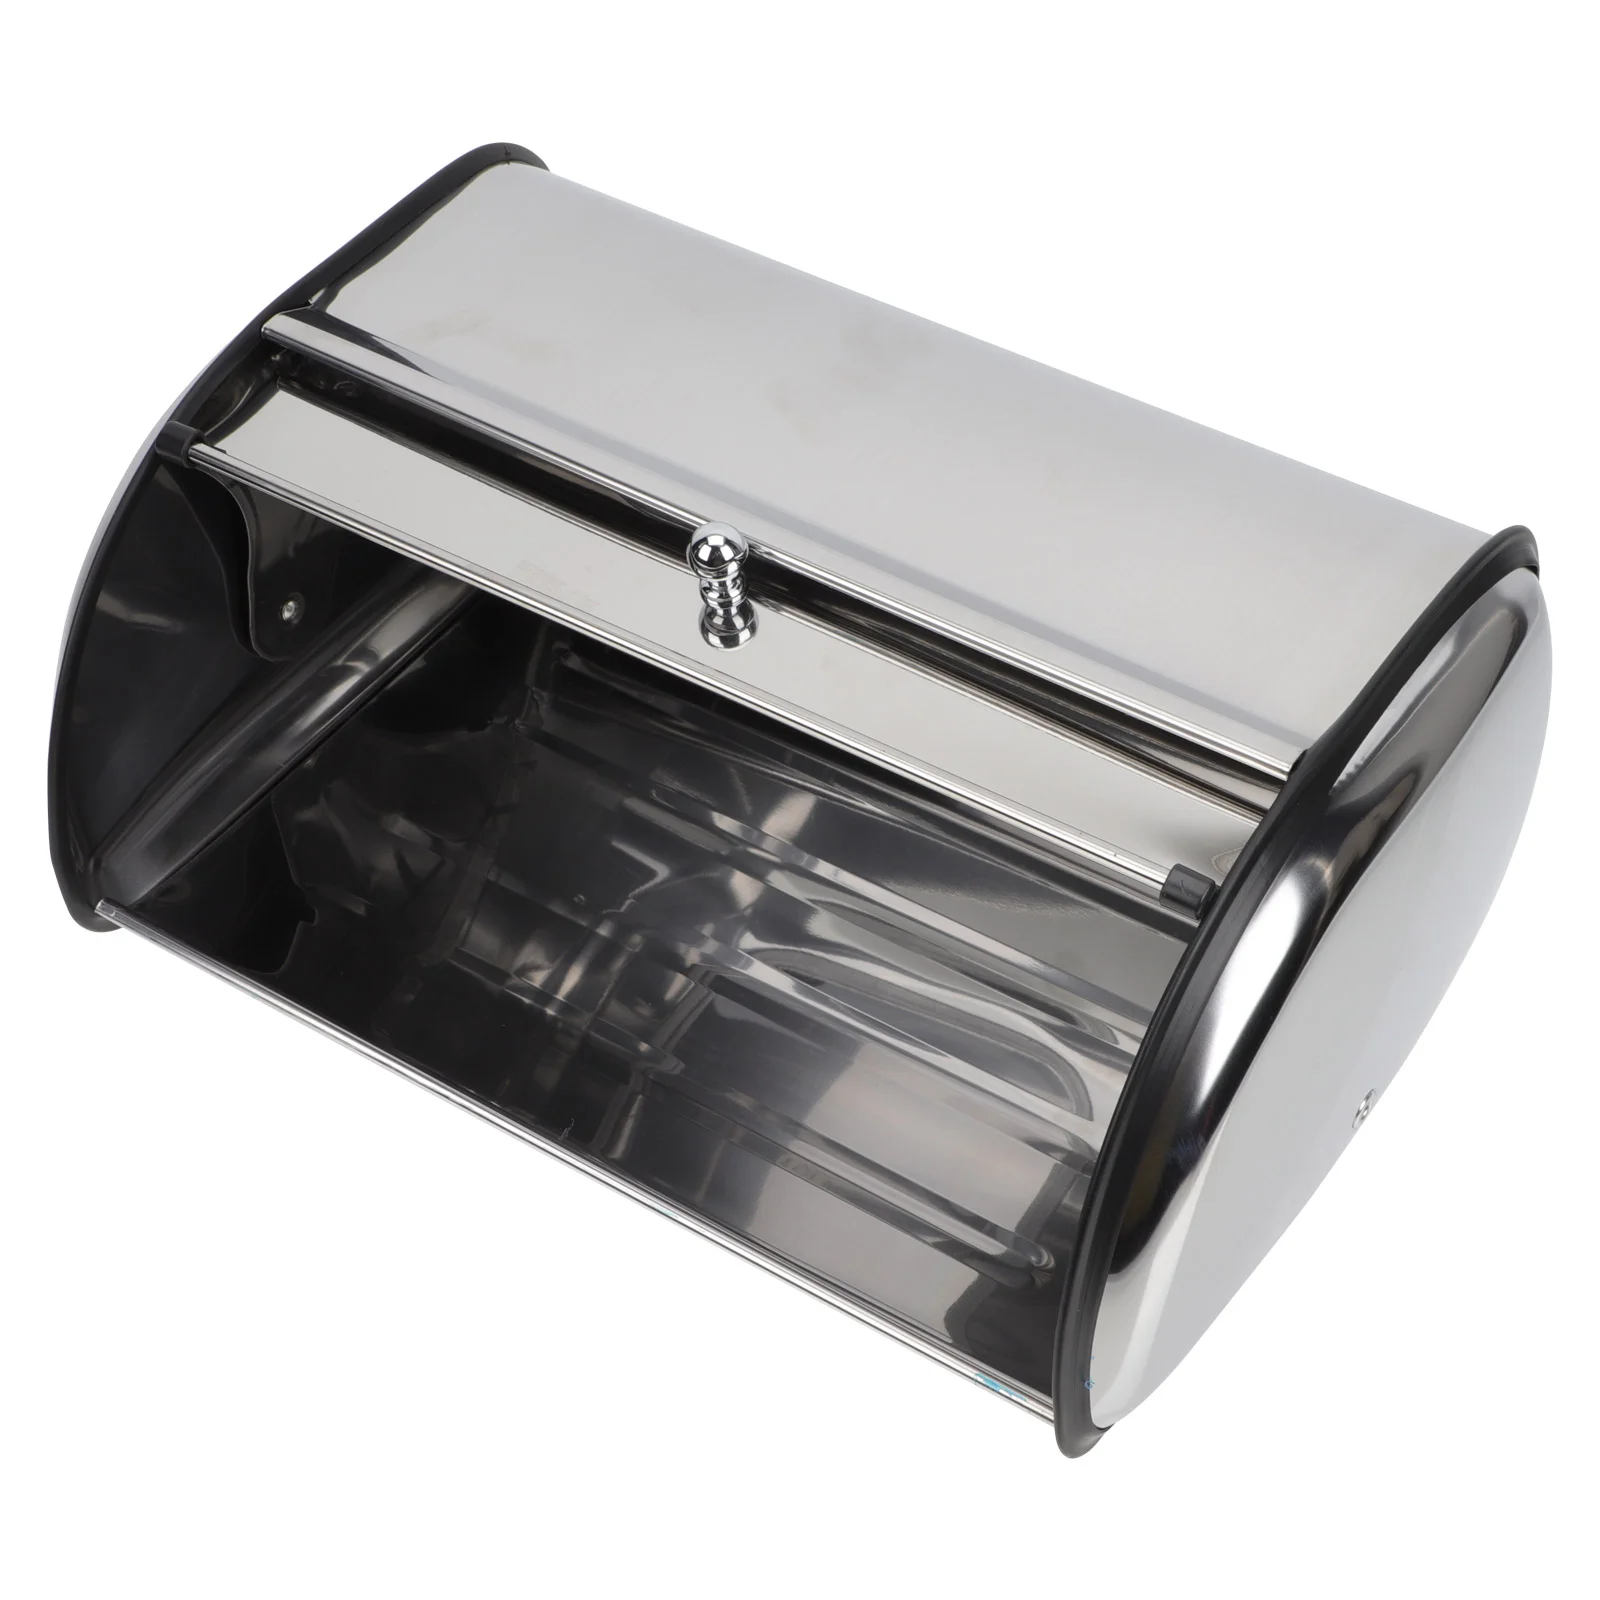 Bread Box Kitchen Container Storage Holder Roll Stainless Countertop Bin Bins Keeper Metal Food Steel Lid Up Large Organizer